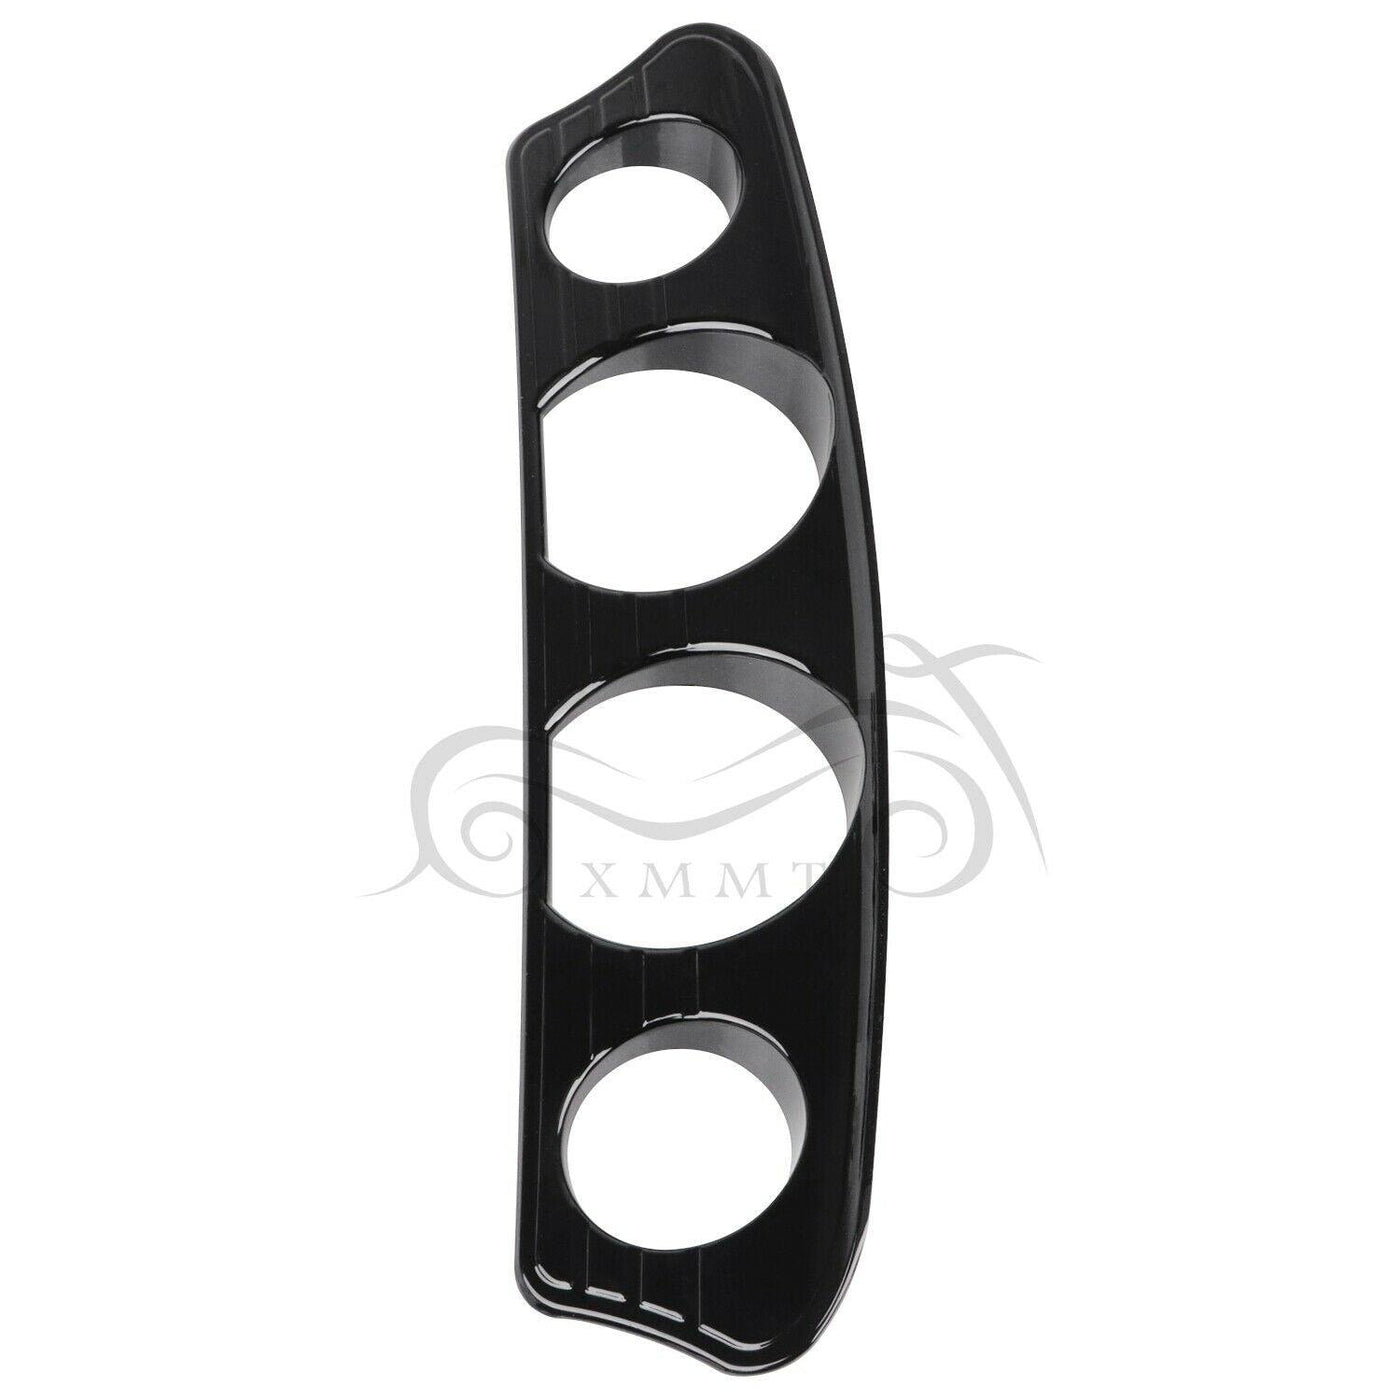 Black Gauge Bezel Stereo Trim Plate For Harley Electra Street Tri Glide Classic - Moto Life Products